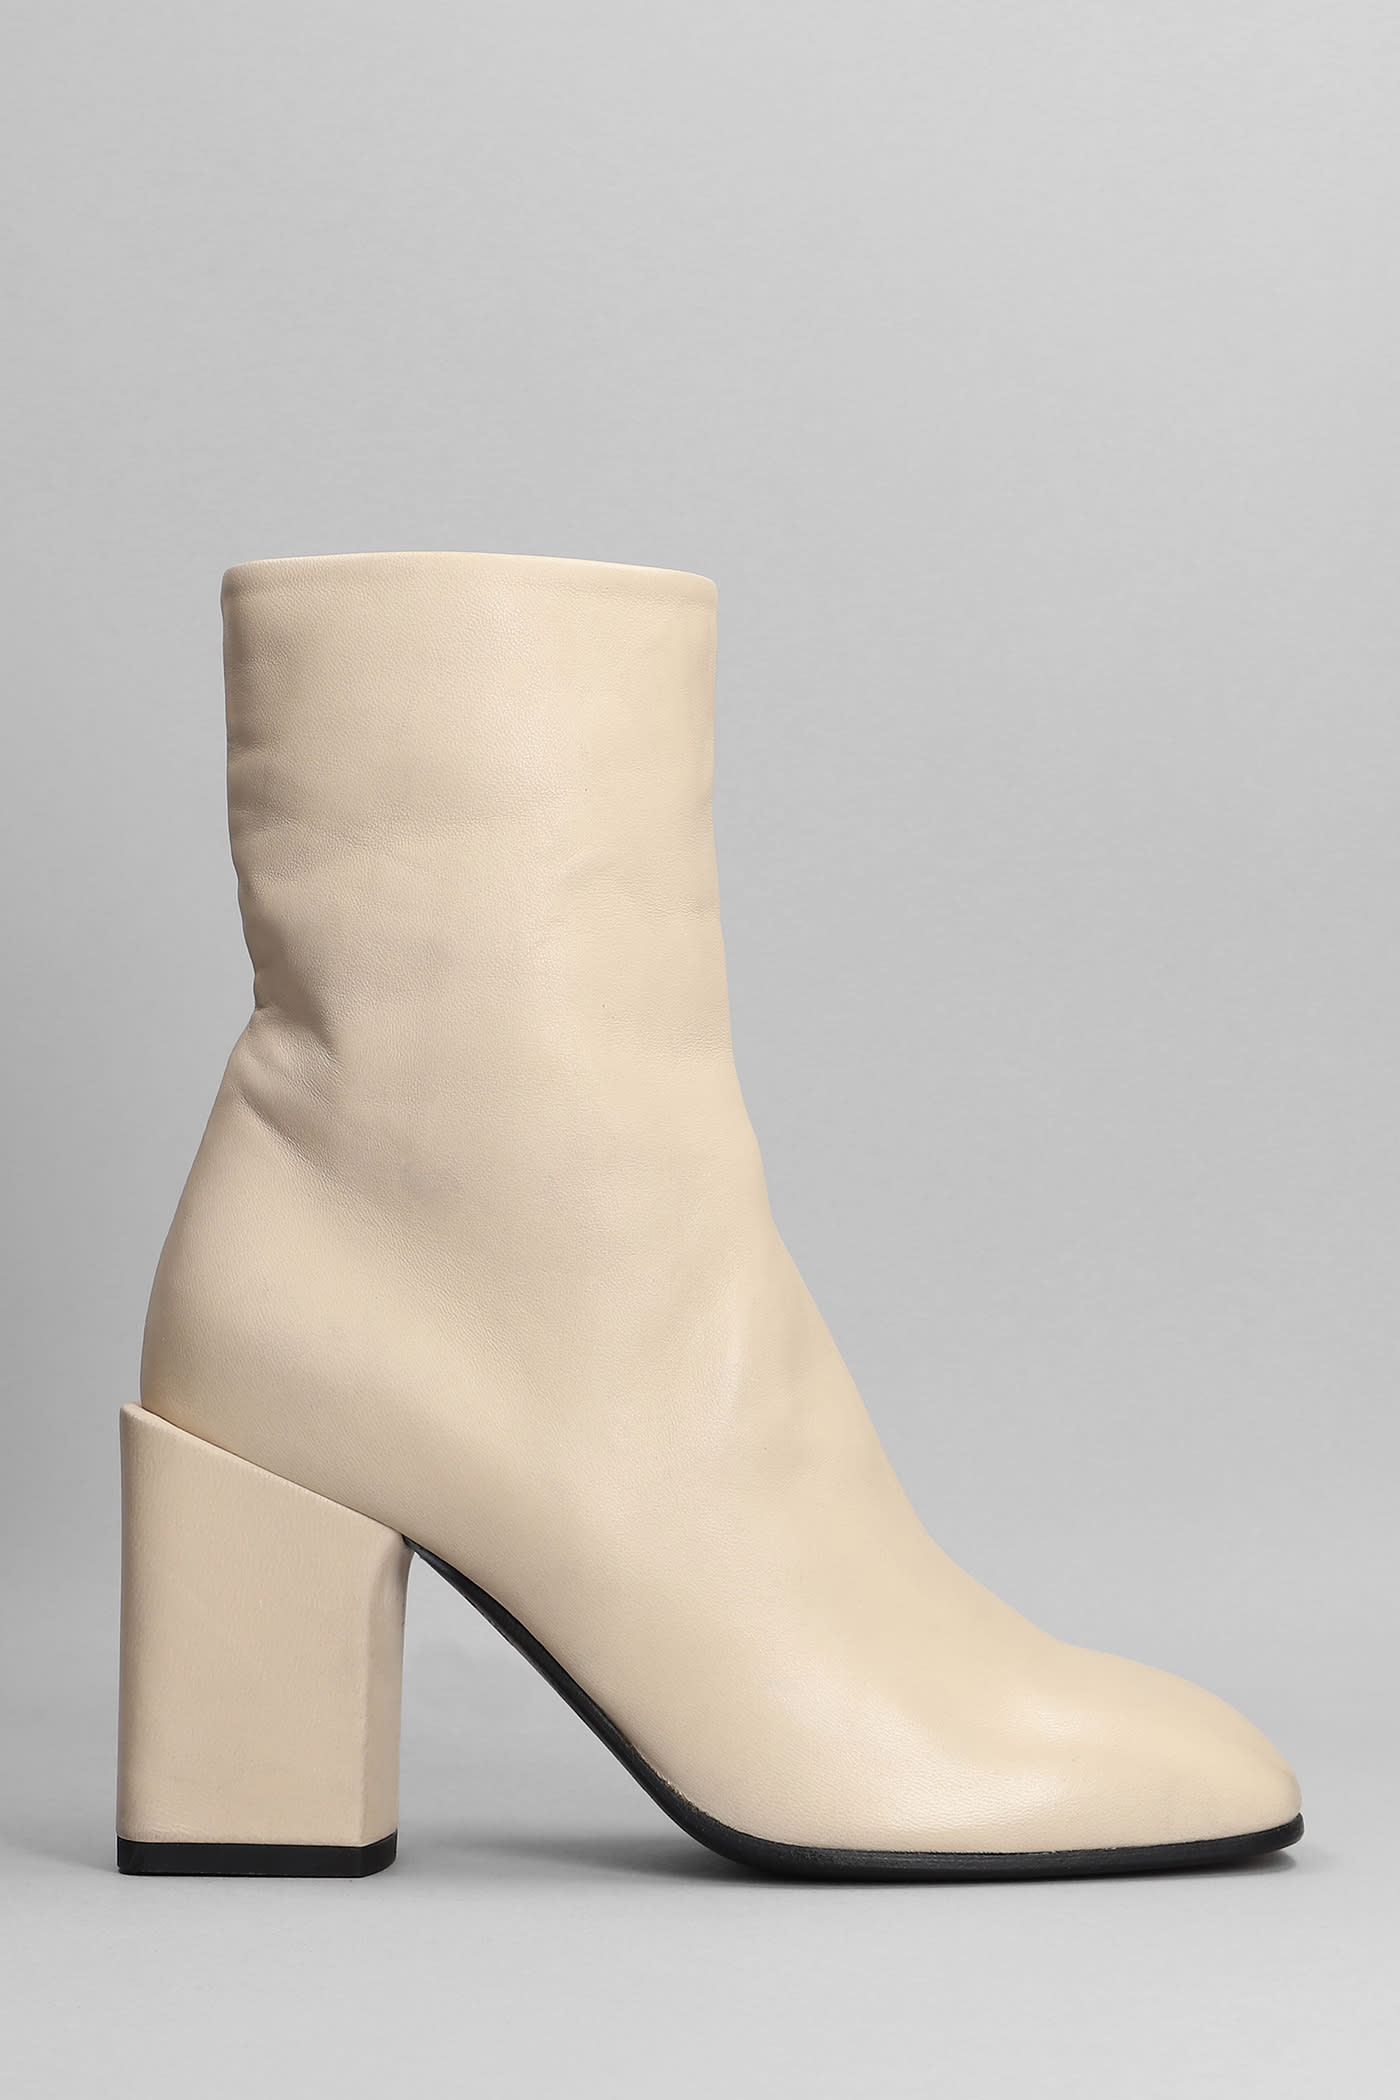 Officine Creative Lutrec 002 High Heels Ankle Boots In Beige Leather